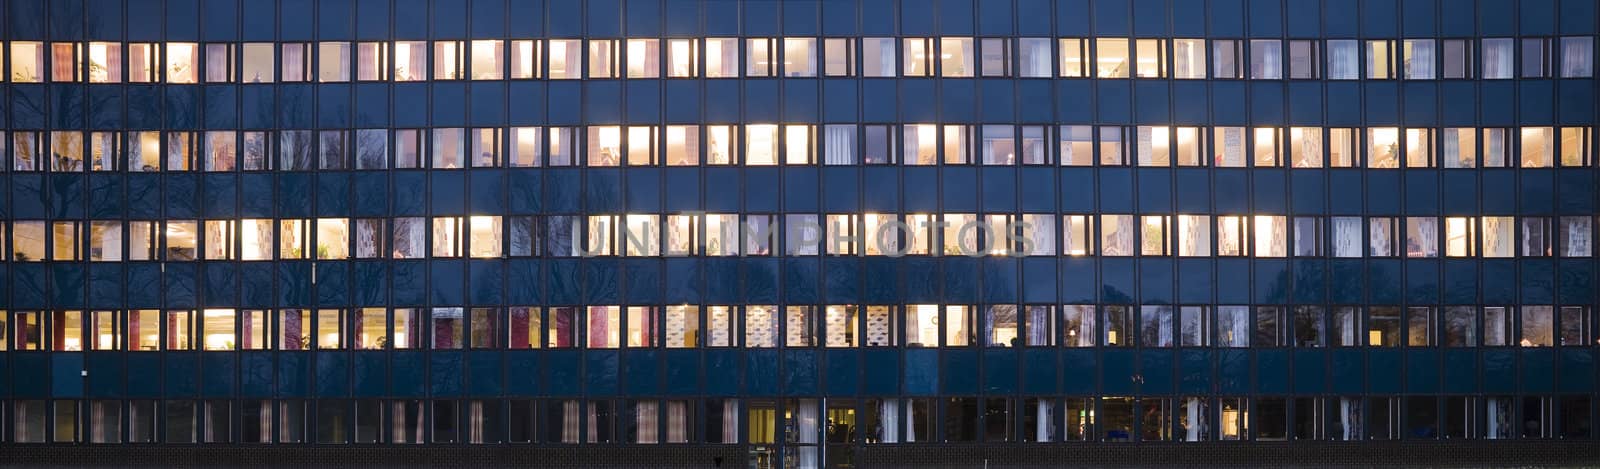 Windows glowing in the night on an office building by gemenacom